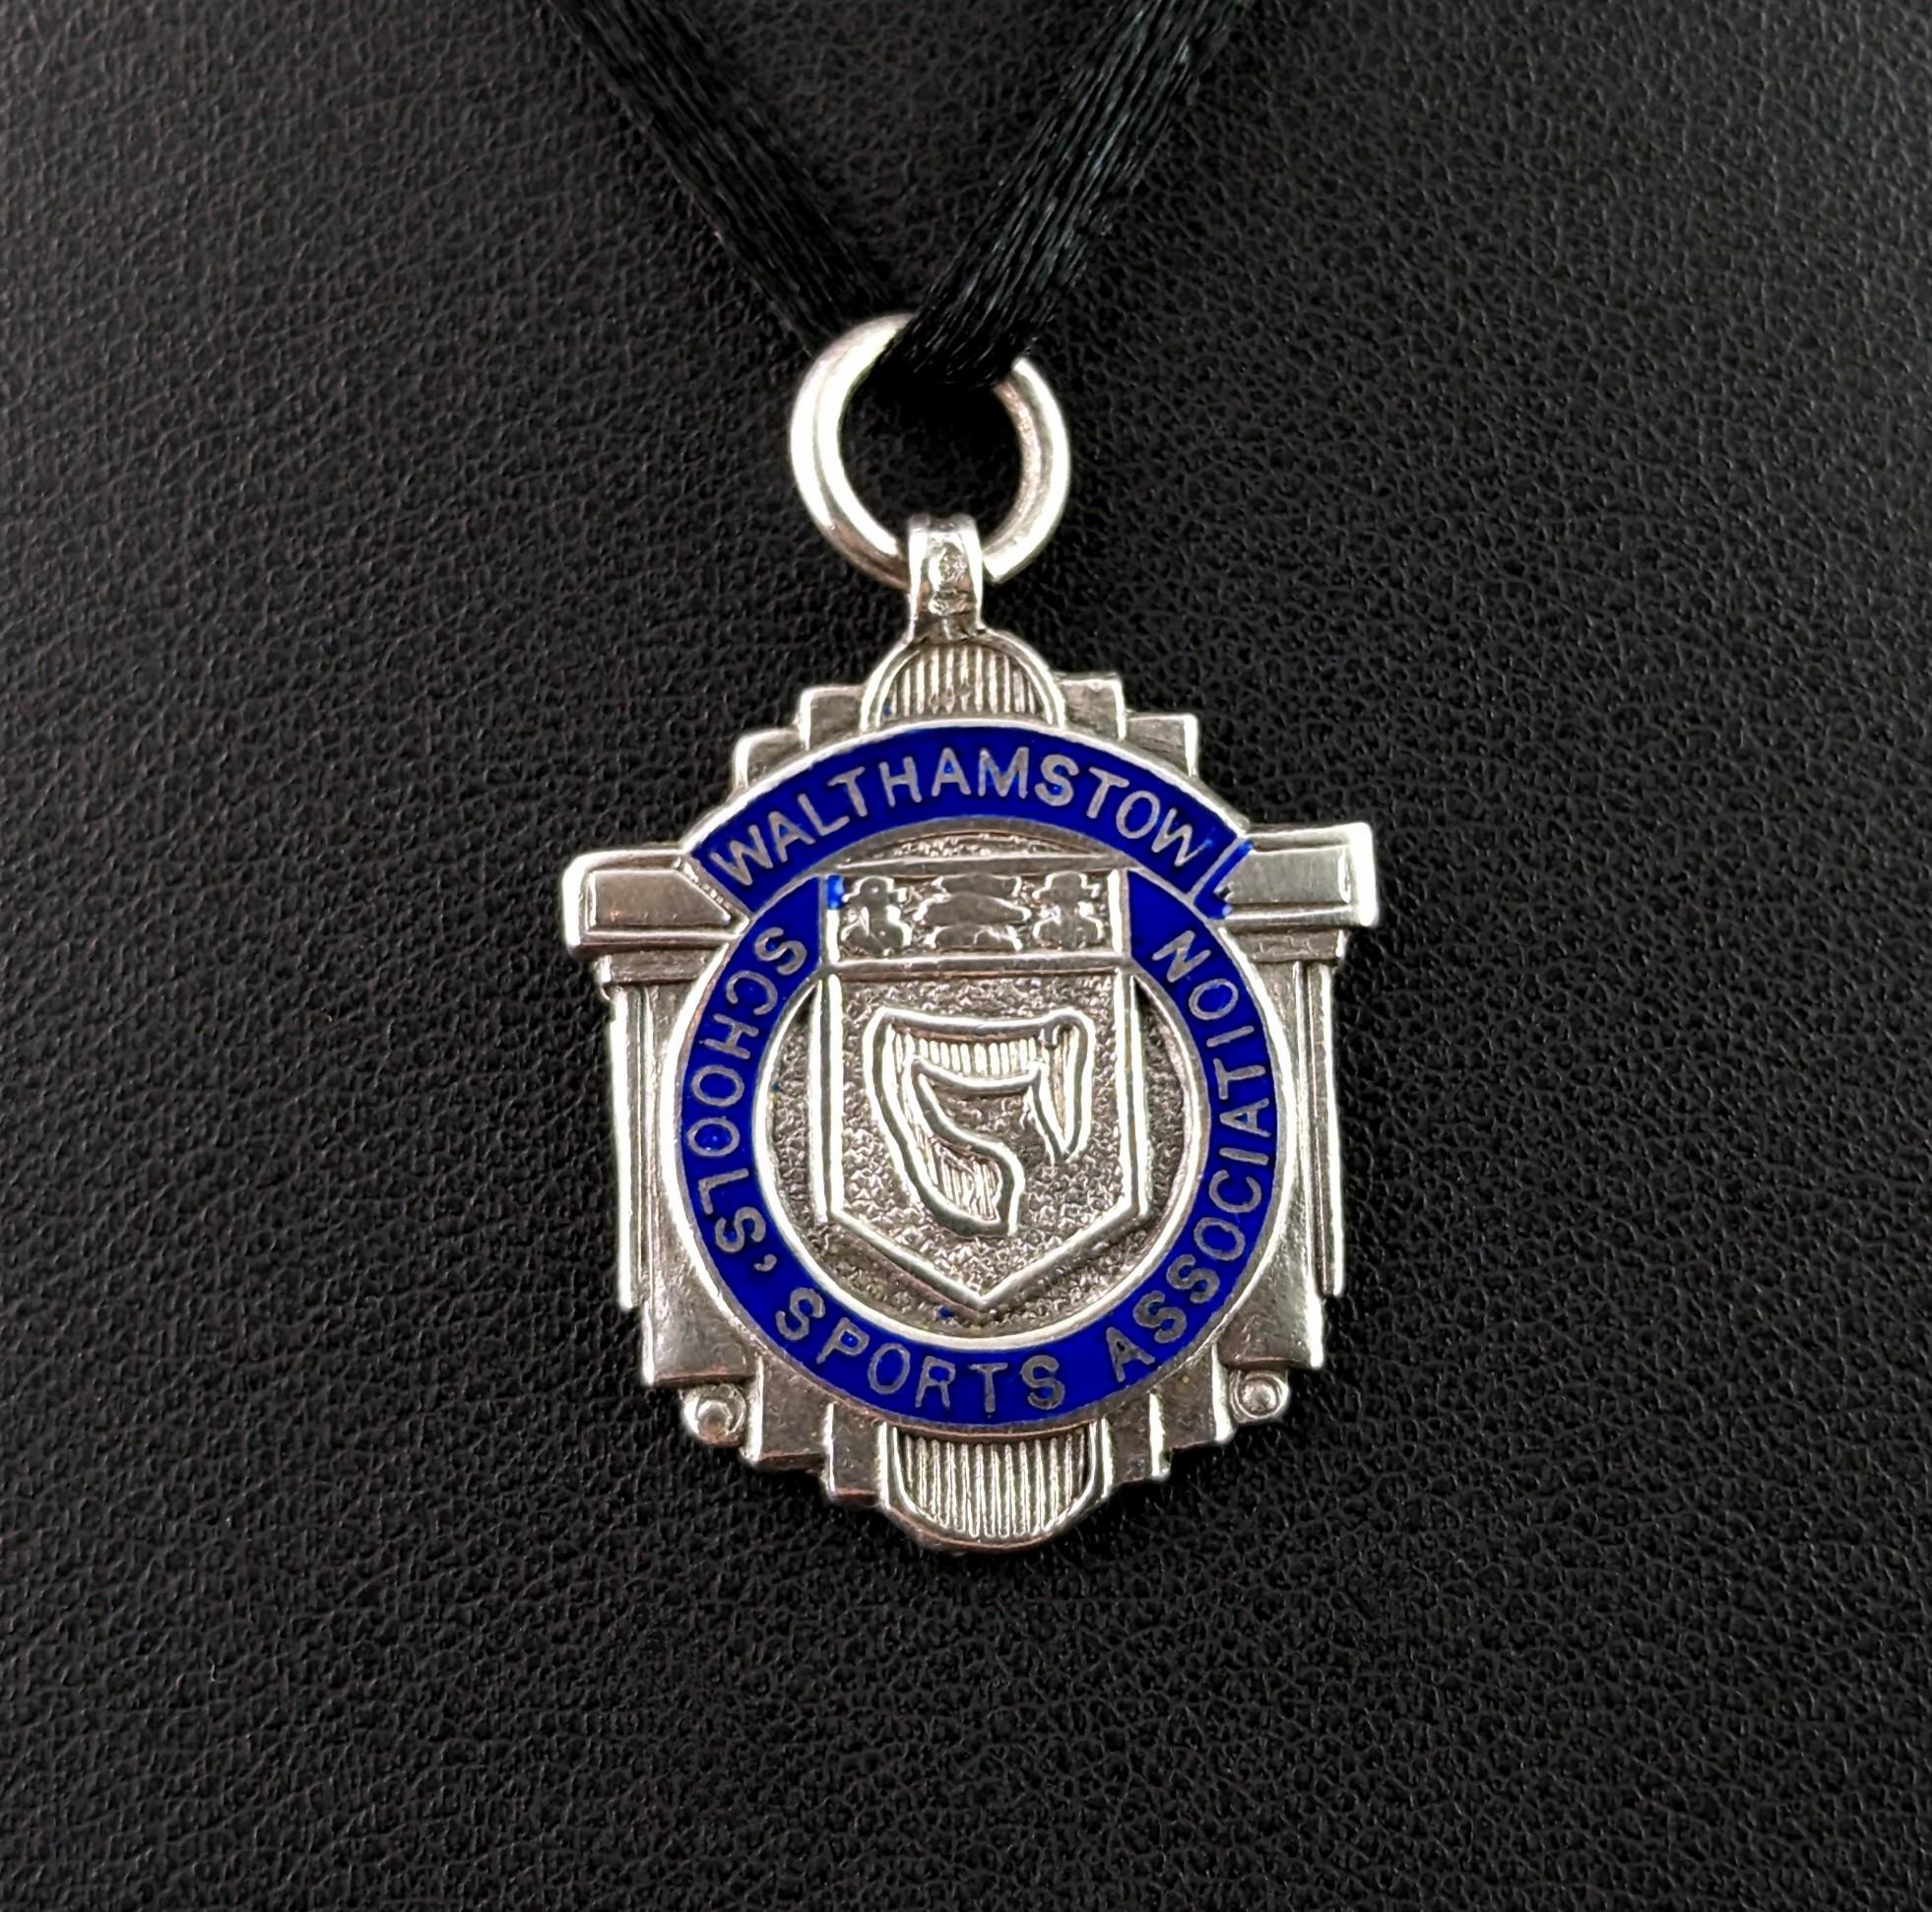 An attractive vintage sterling silver and enamel fob pendant.

It is an unusual shaped piece with a column design, the fob has a blue enamel circular rim with lettering picked out in silver, Walthamstow School Sports Association and has a central